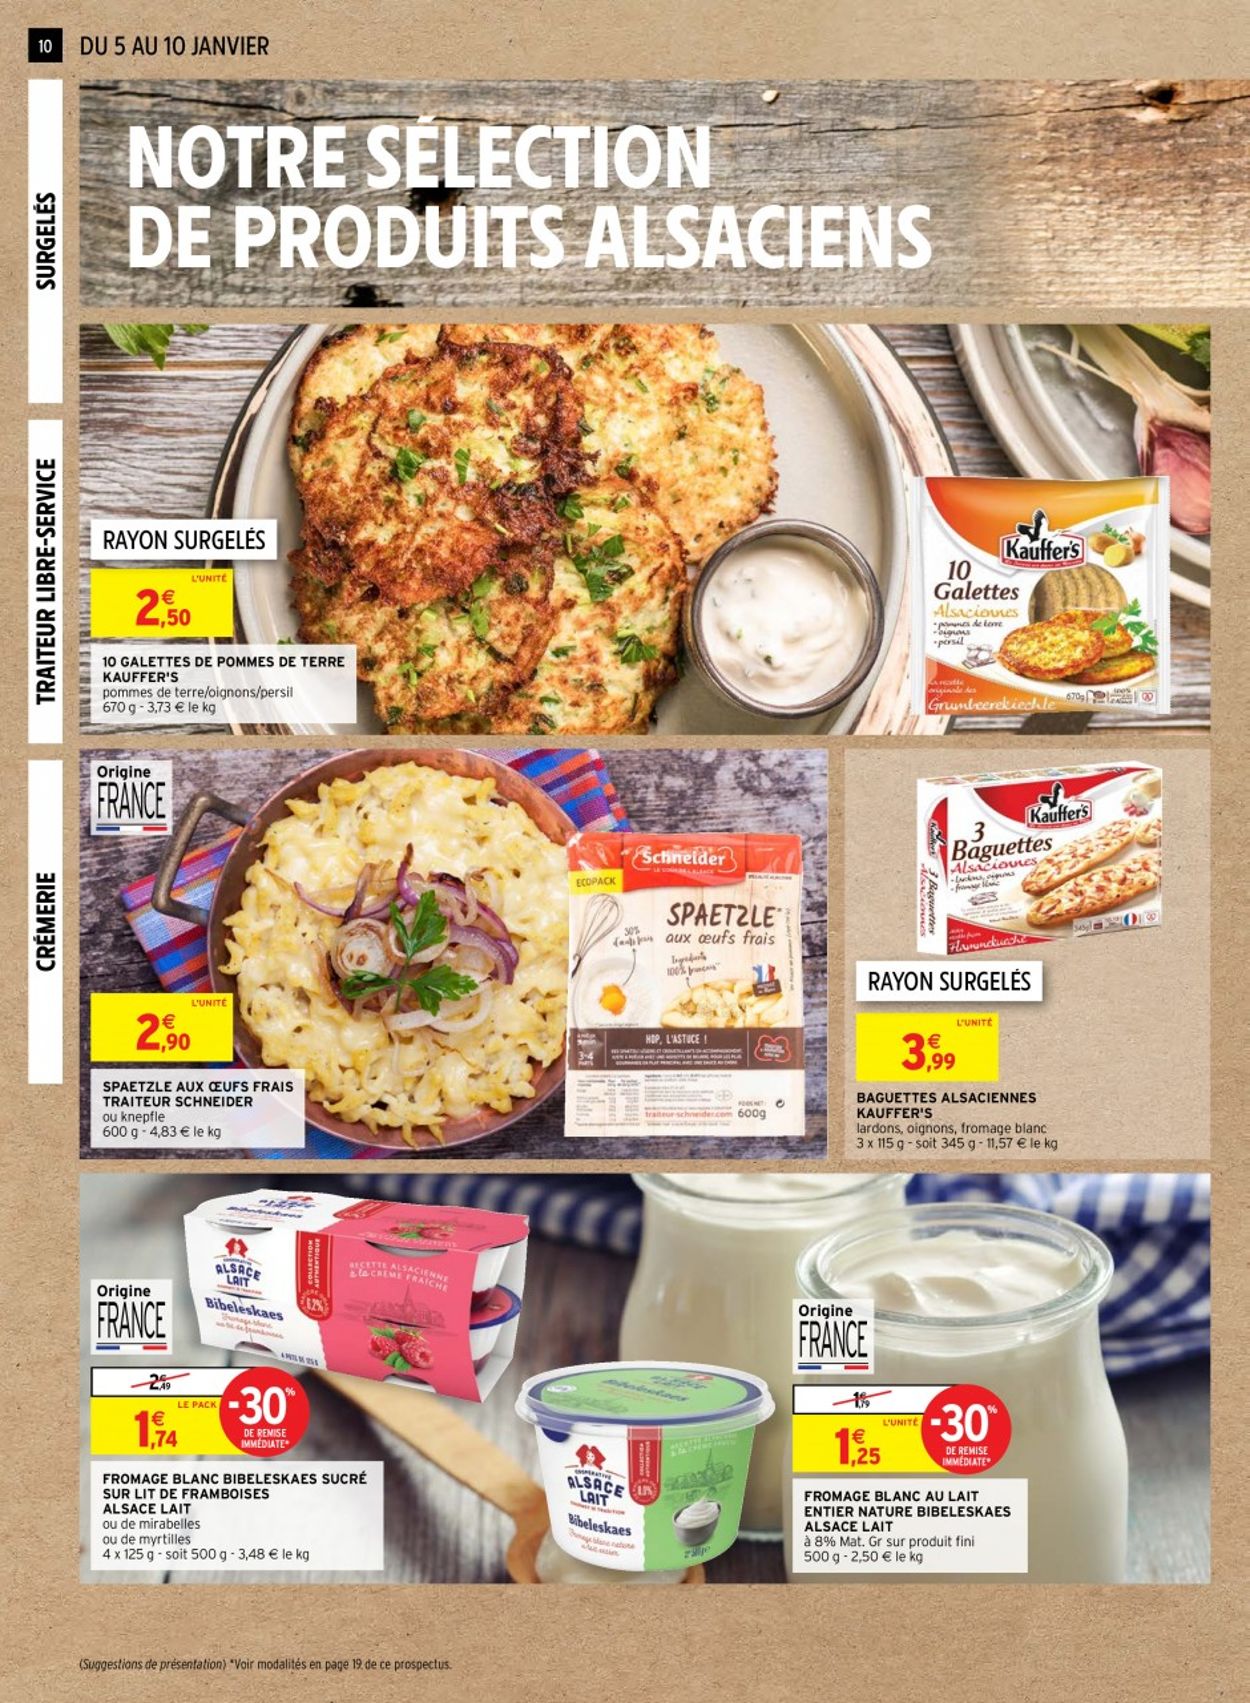 Intermarché Special Choucroute 2021 Catalogue - 05.01-10.01.2021 (Page 10)